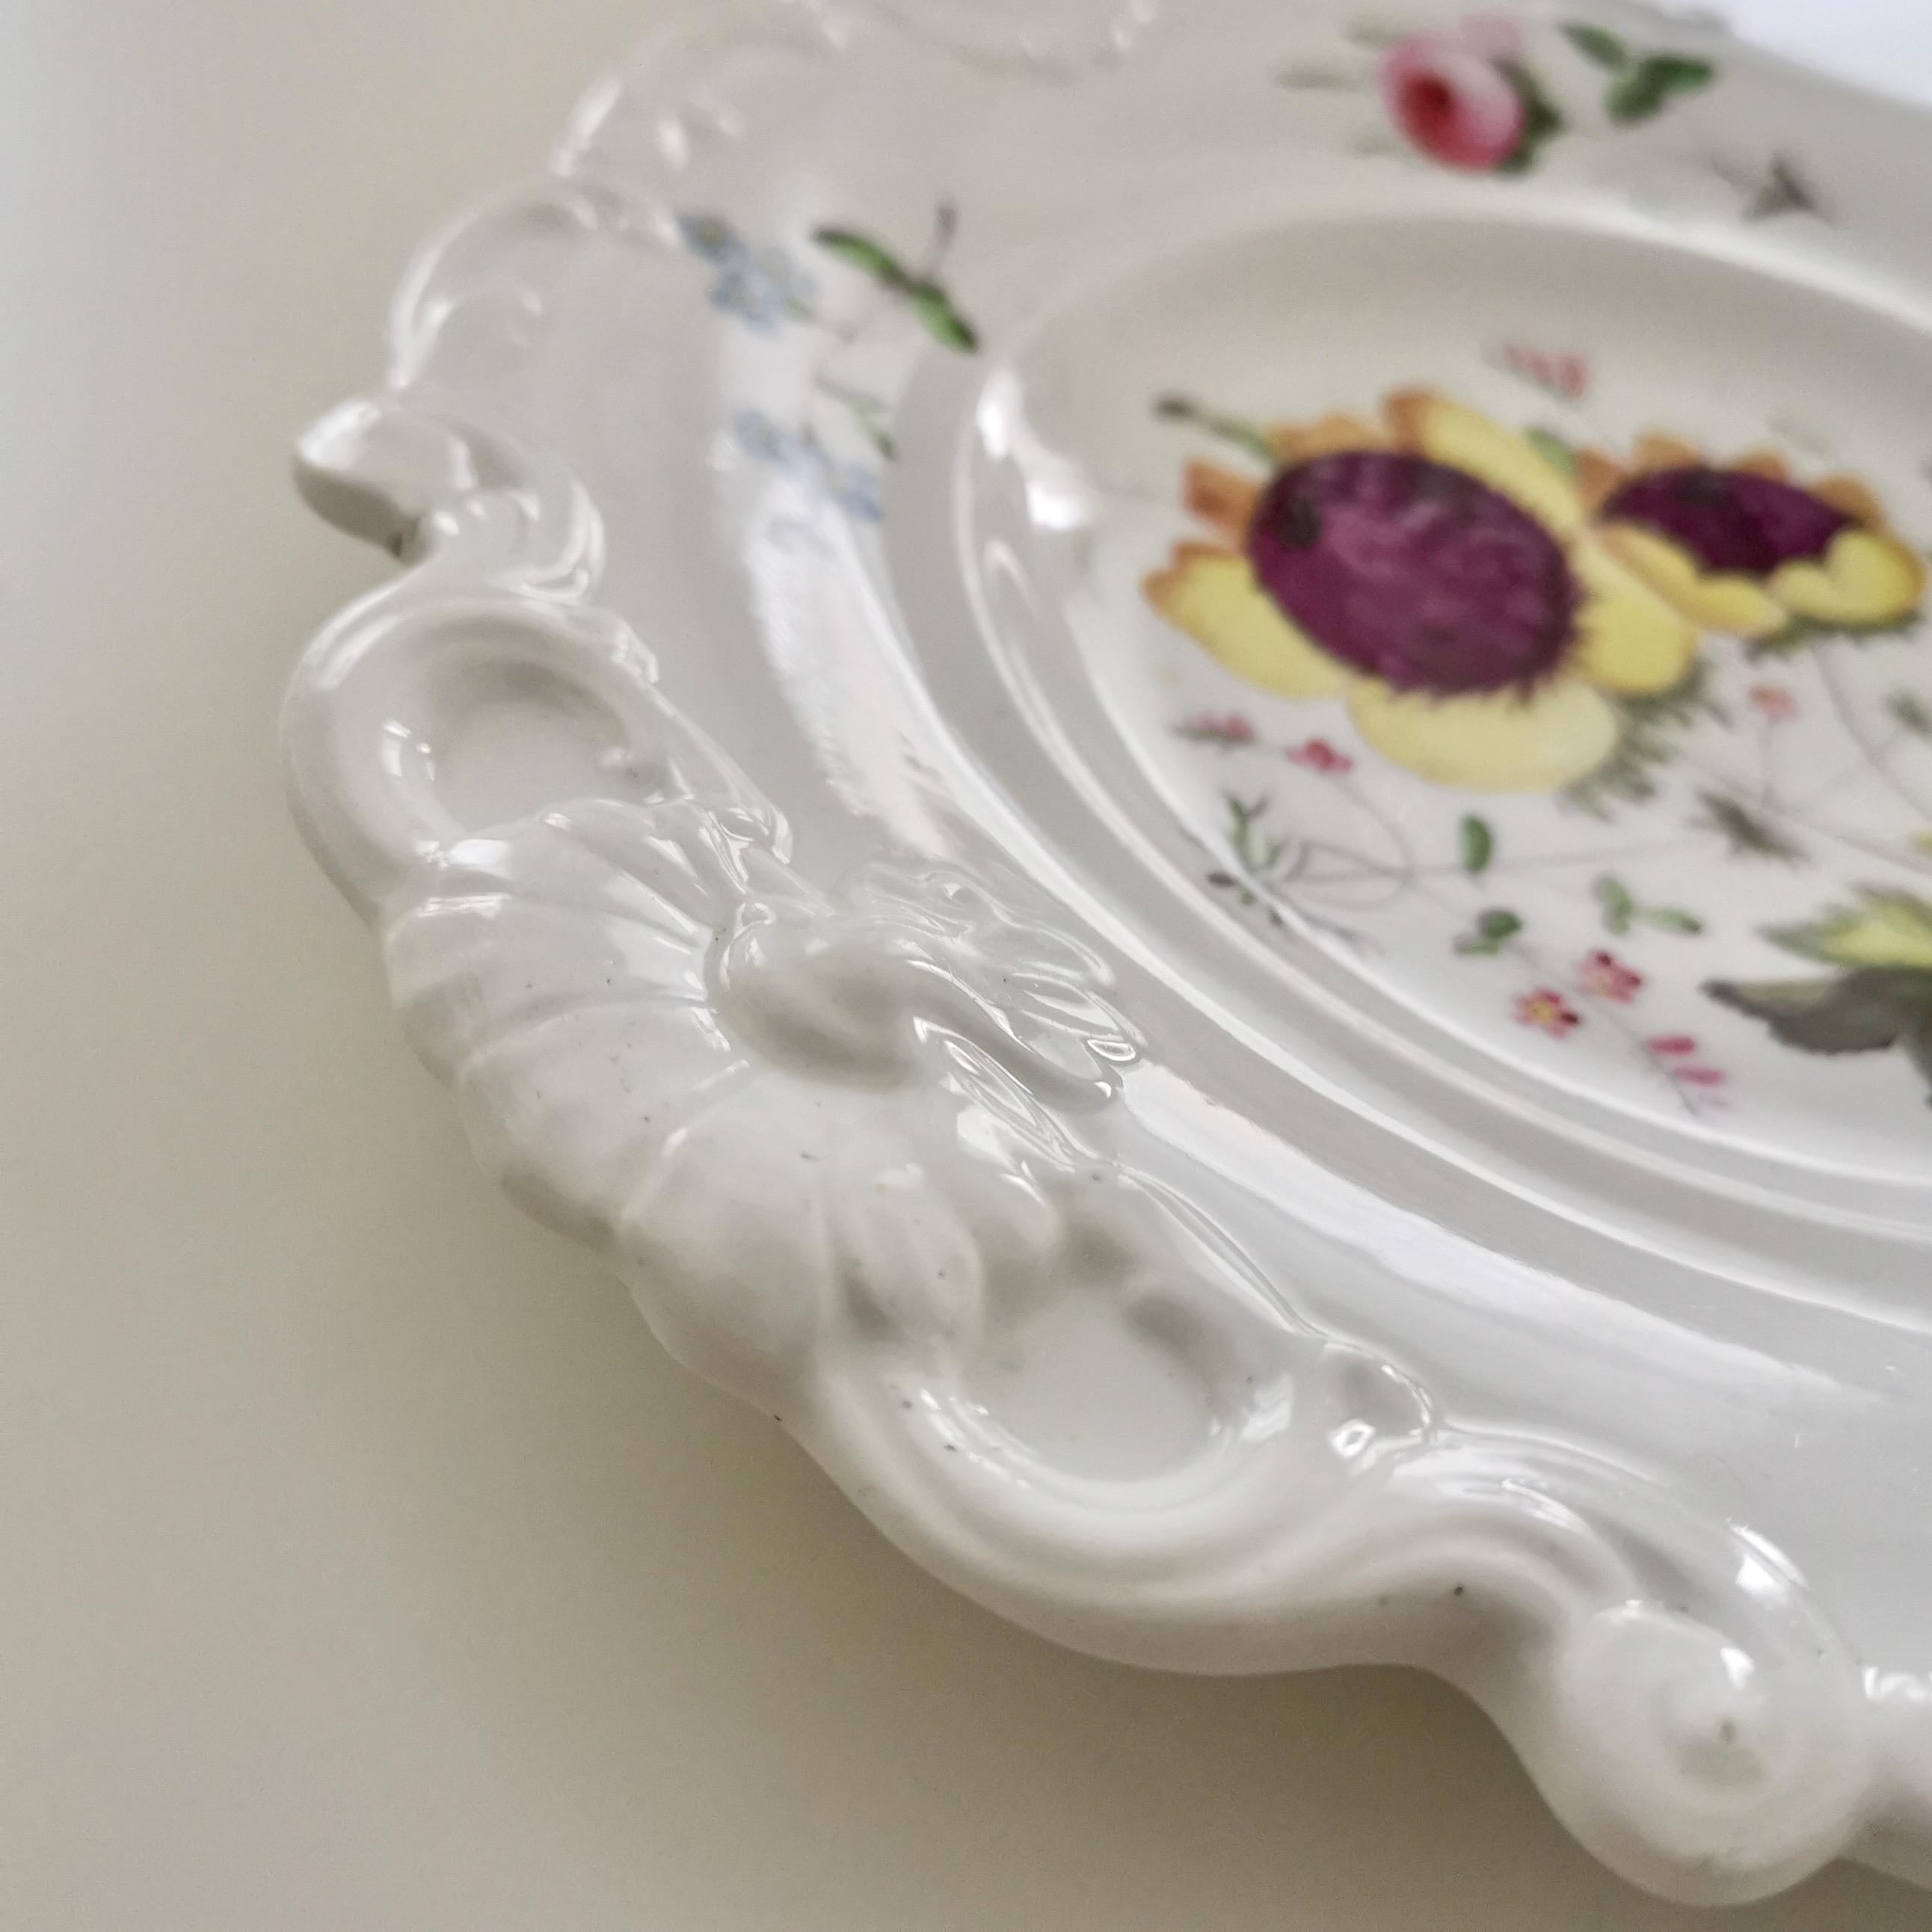 New Hall Porcelain Plate, White with Flowers, Inverted Shell, Regency circa 1820 7